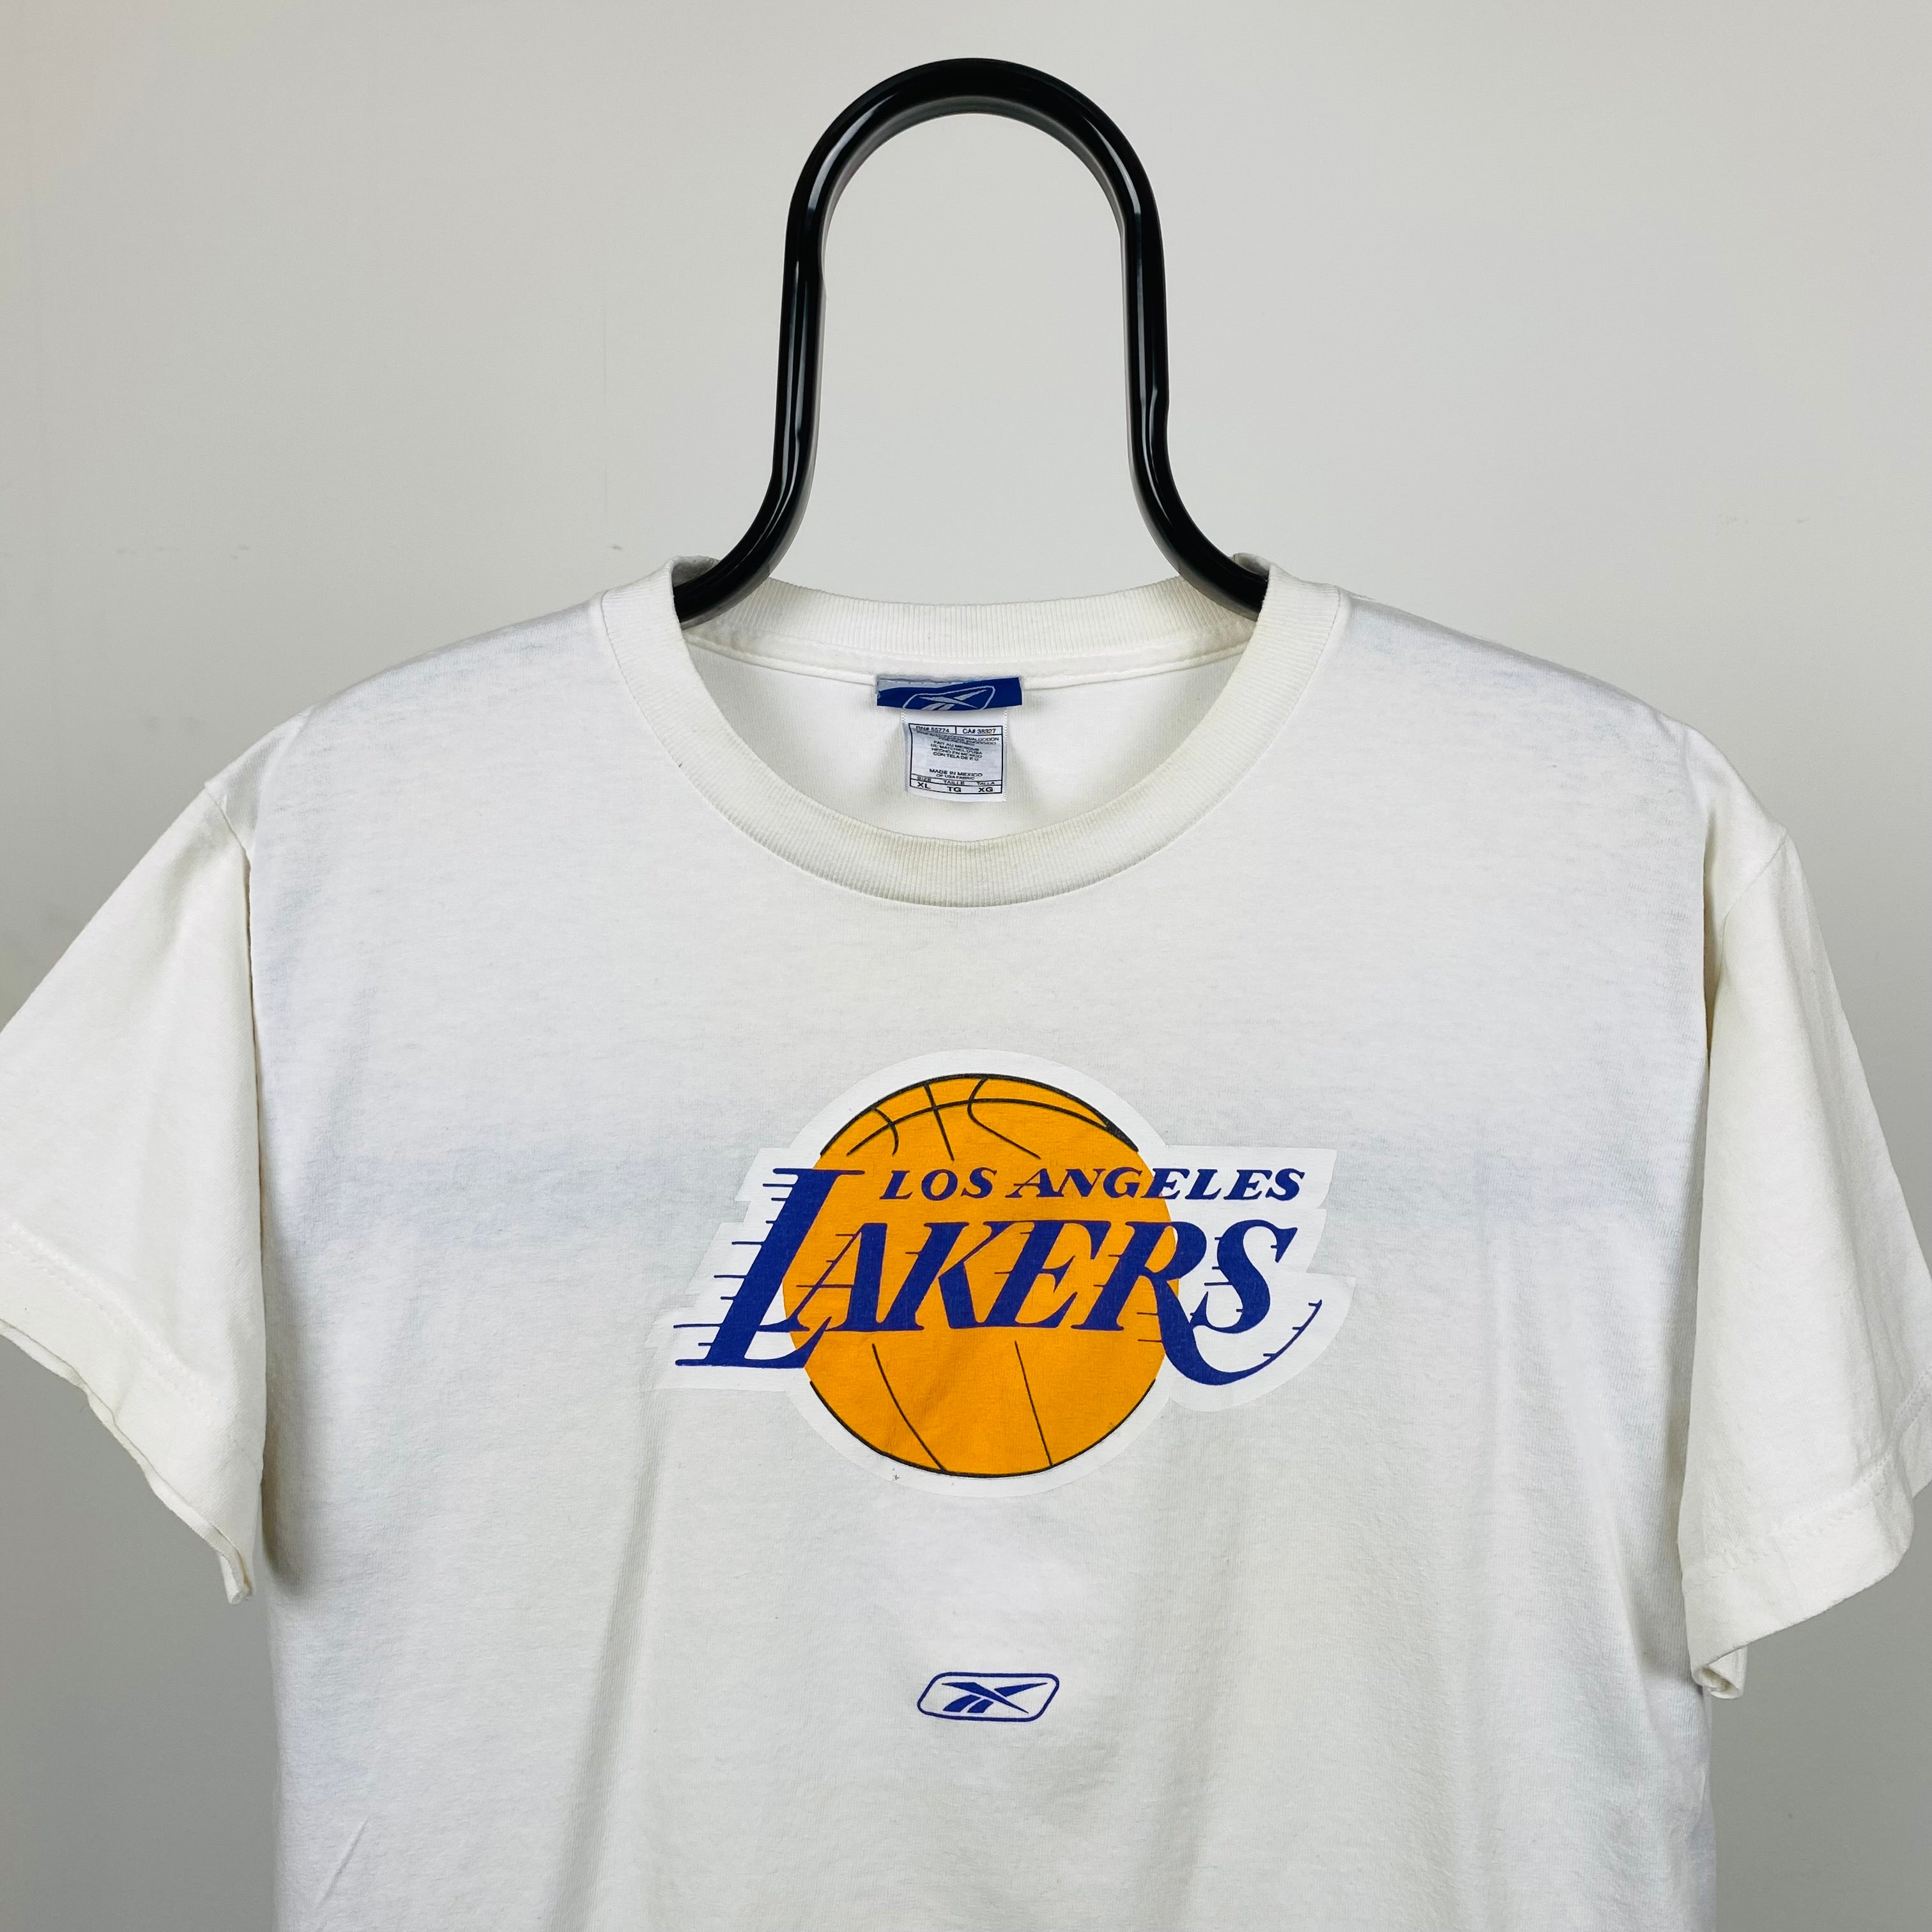 Lakers Tshirts - Buy Lakers Tshirts online in India